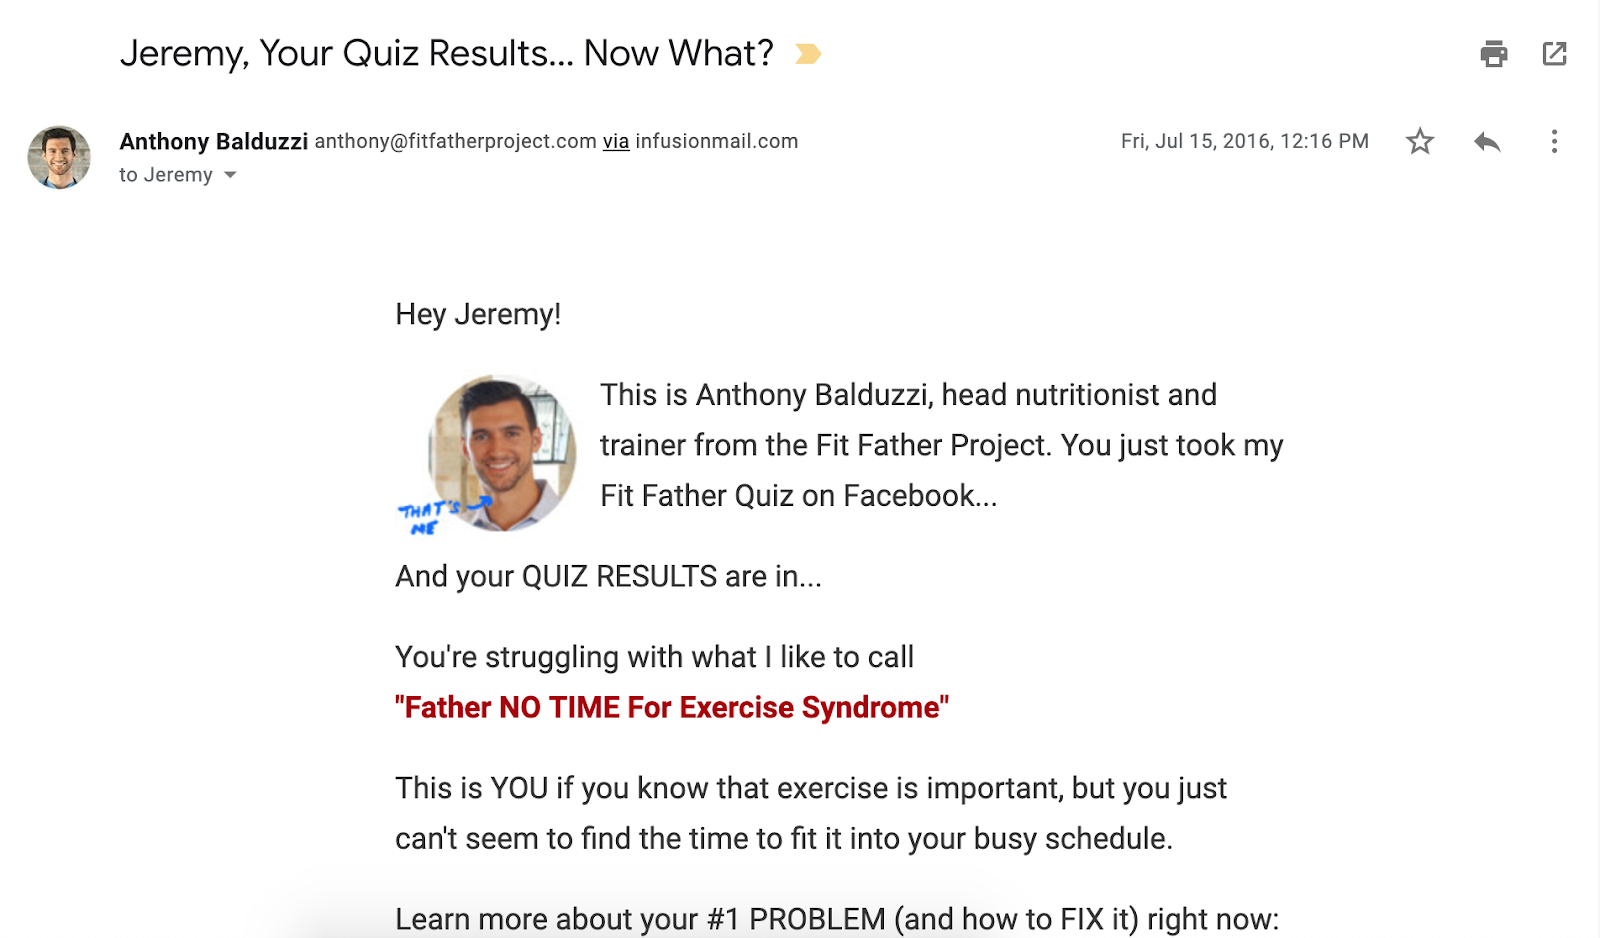 Fit Father Project Email Marketing Example